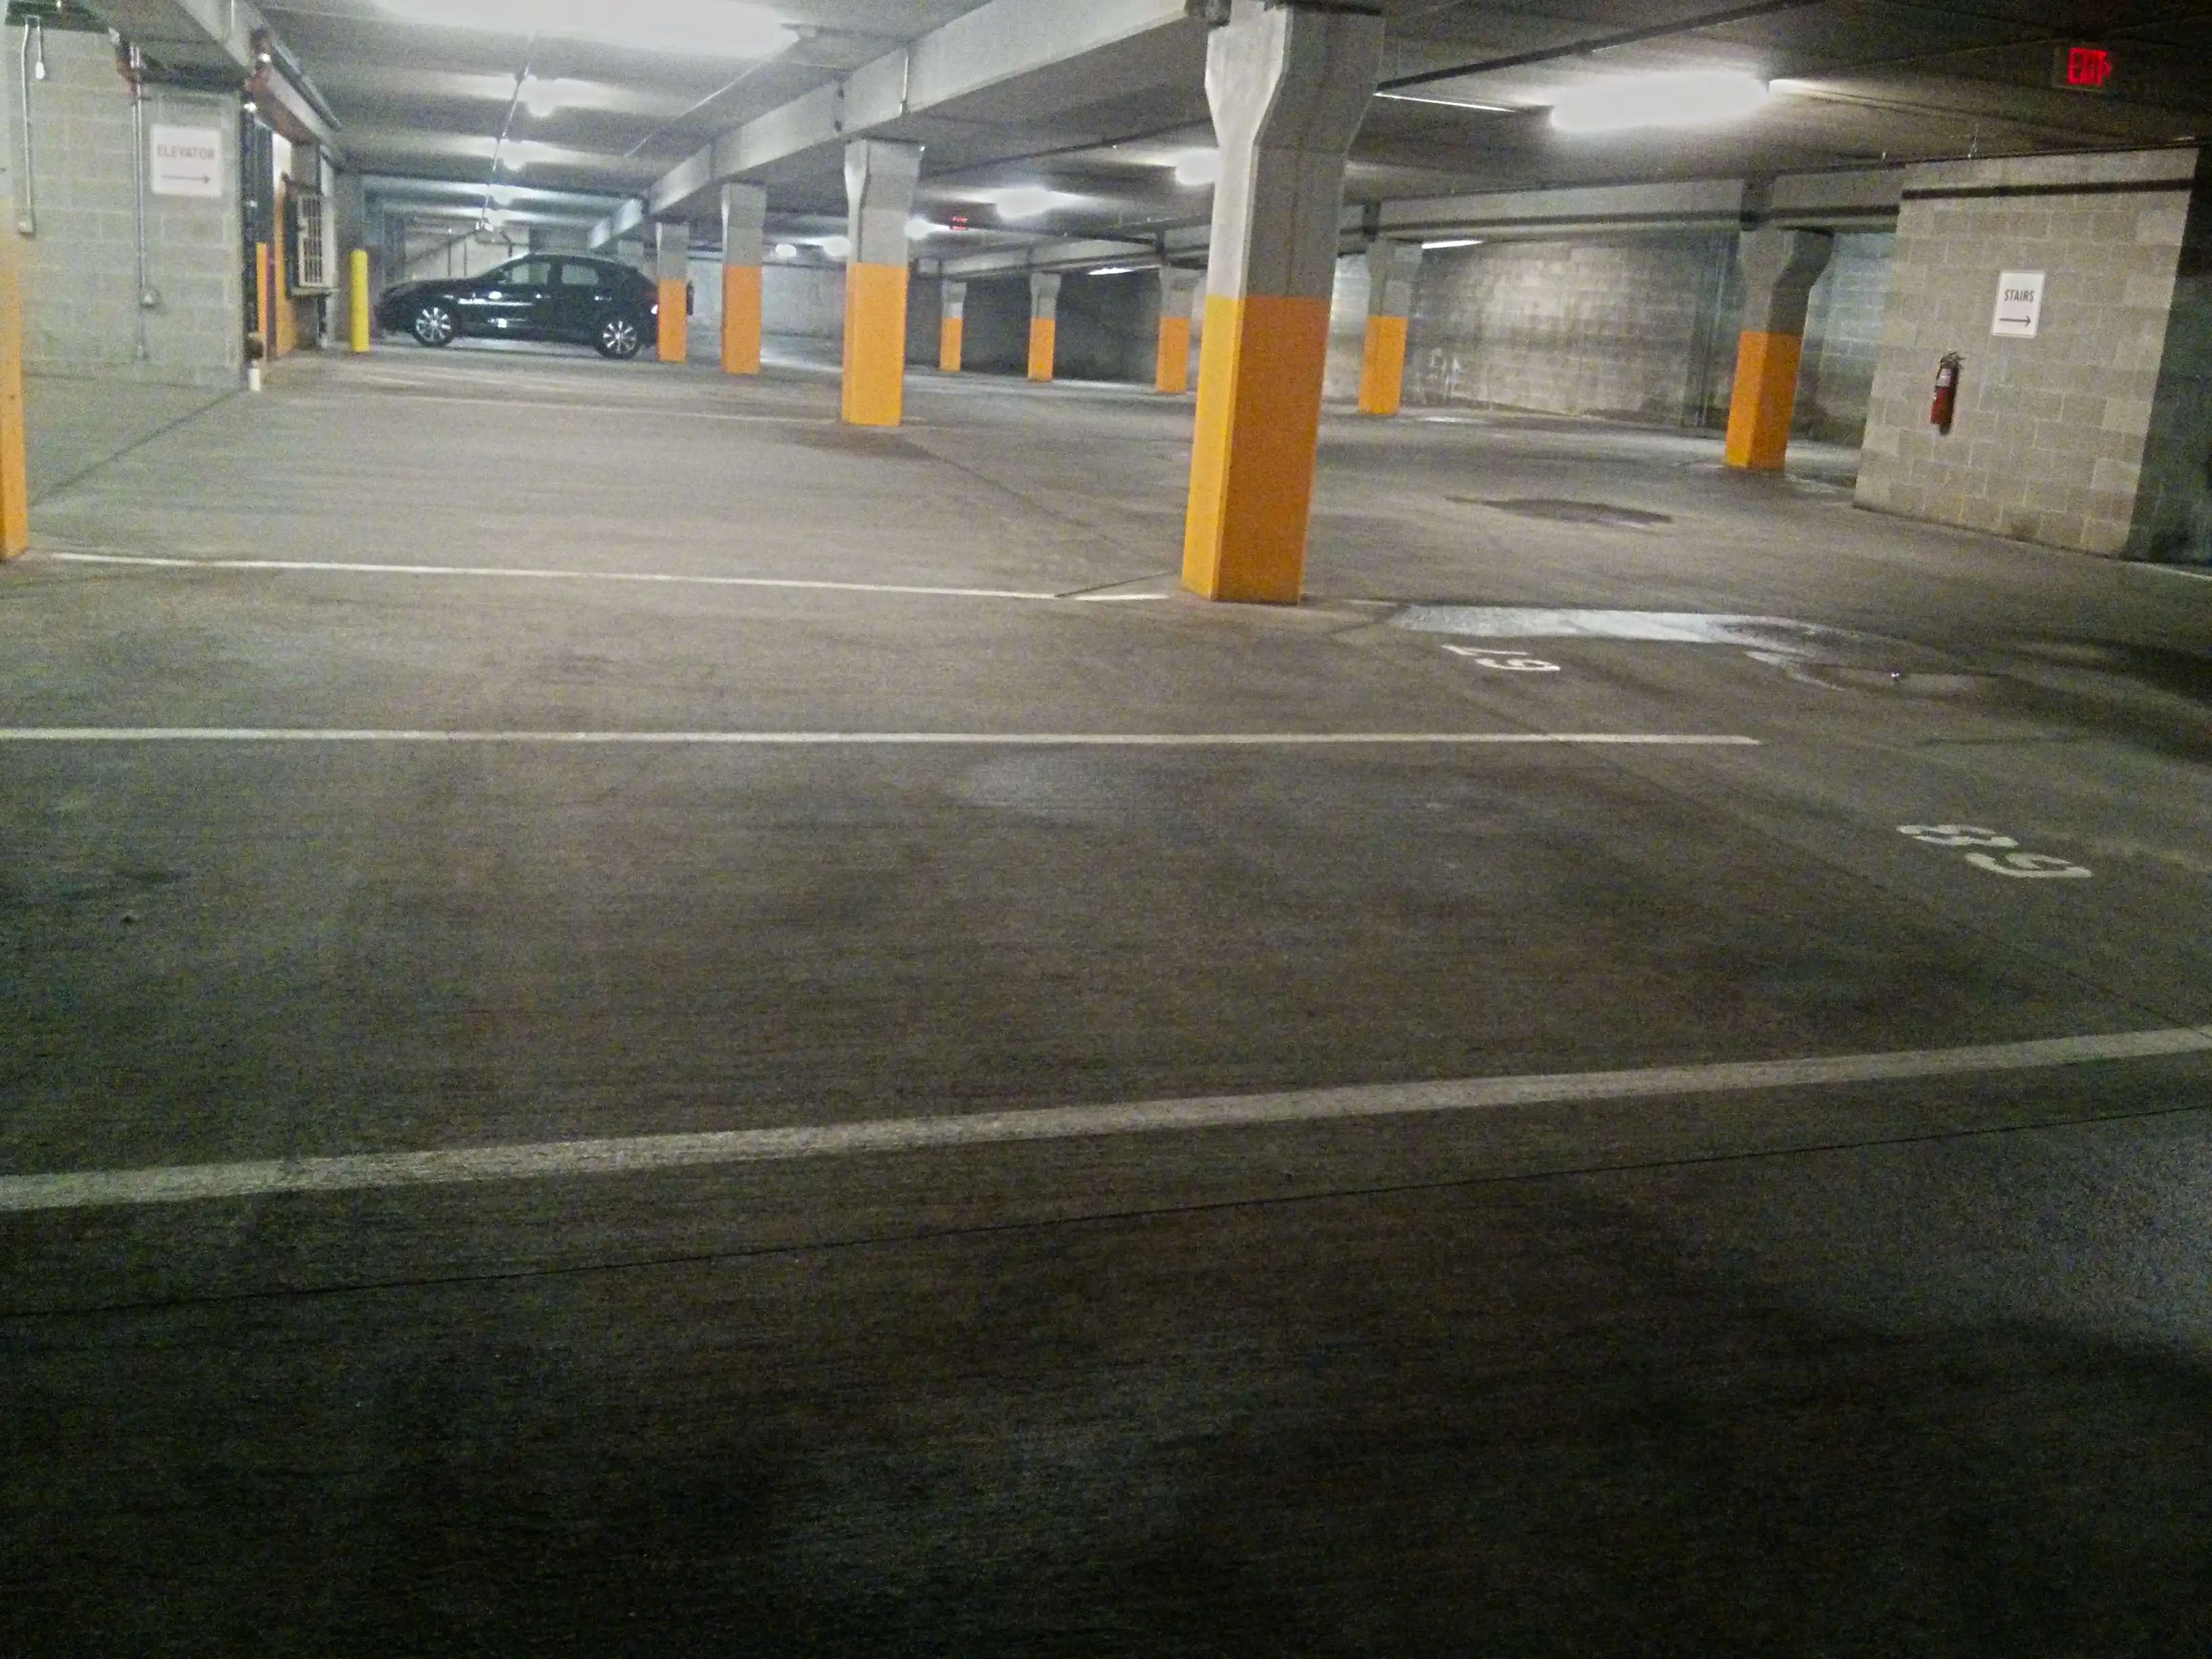 132-parking-stalls-in-this-minneapolis-commercial-parking-garage